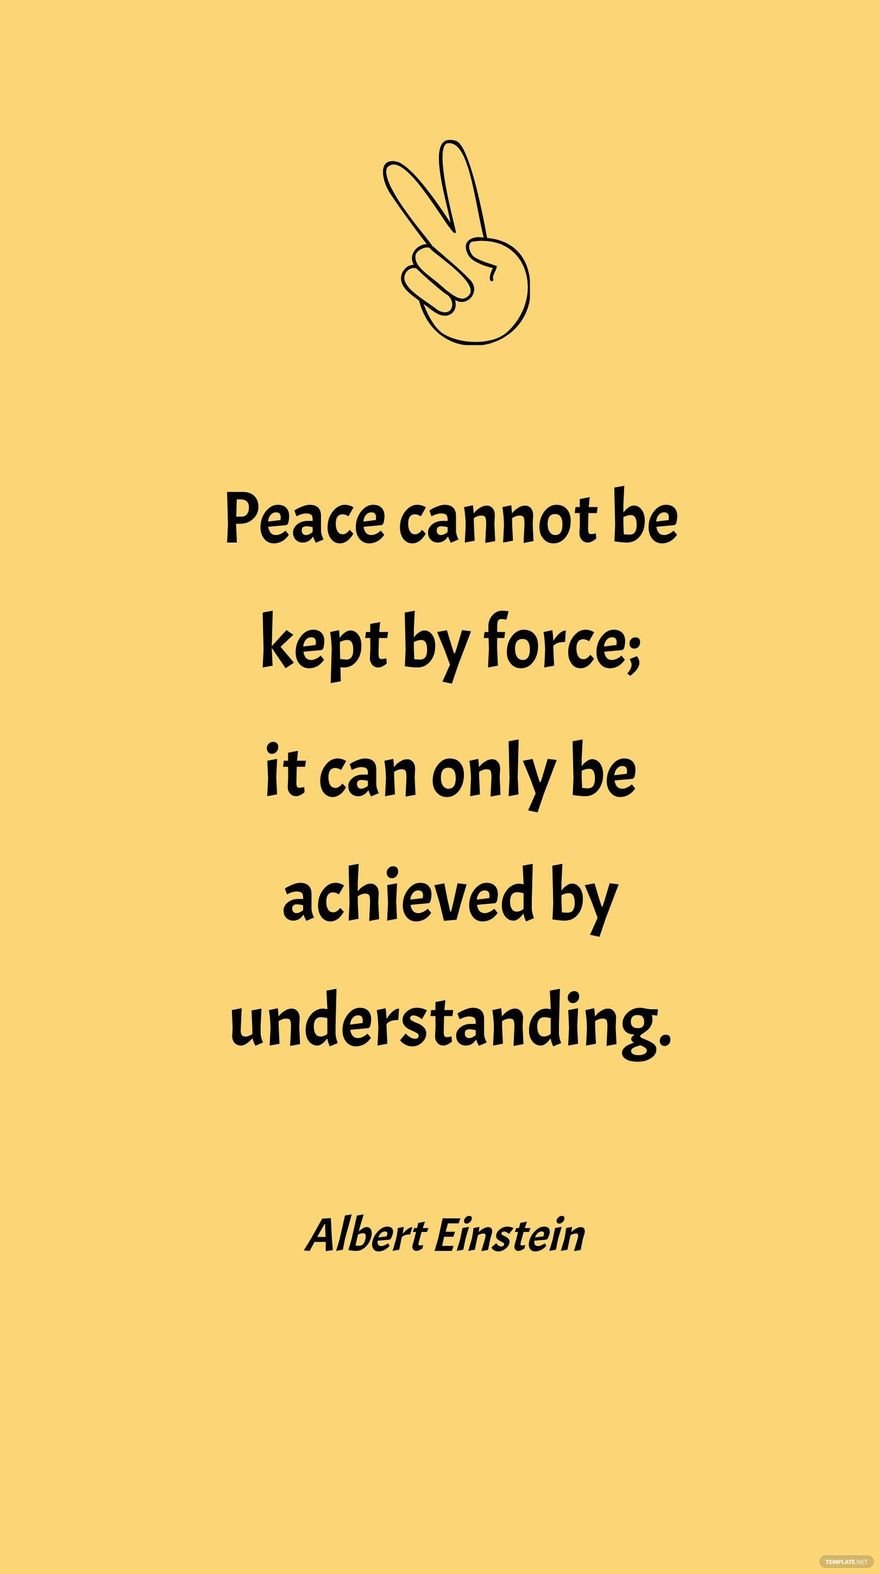 Free Albert Einstein - Peace cannot be kept by force; it can only be achieved by understanding. in JPG